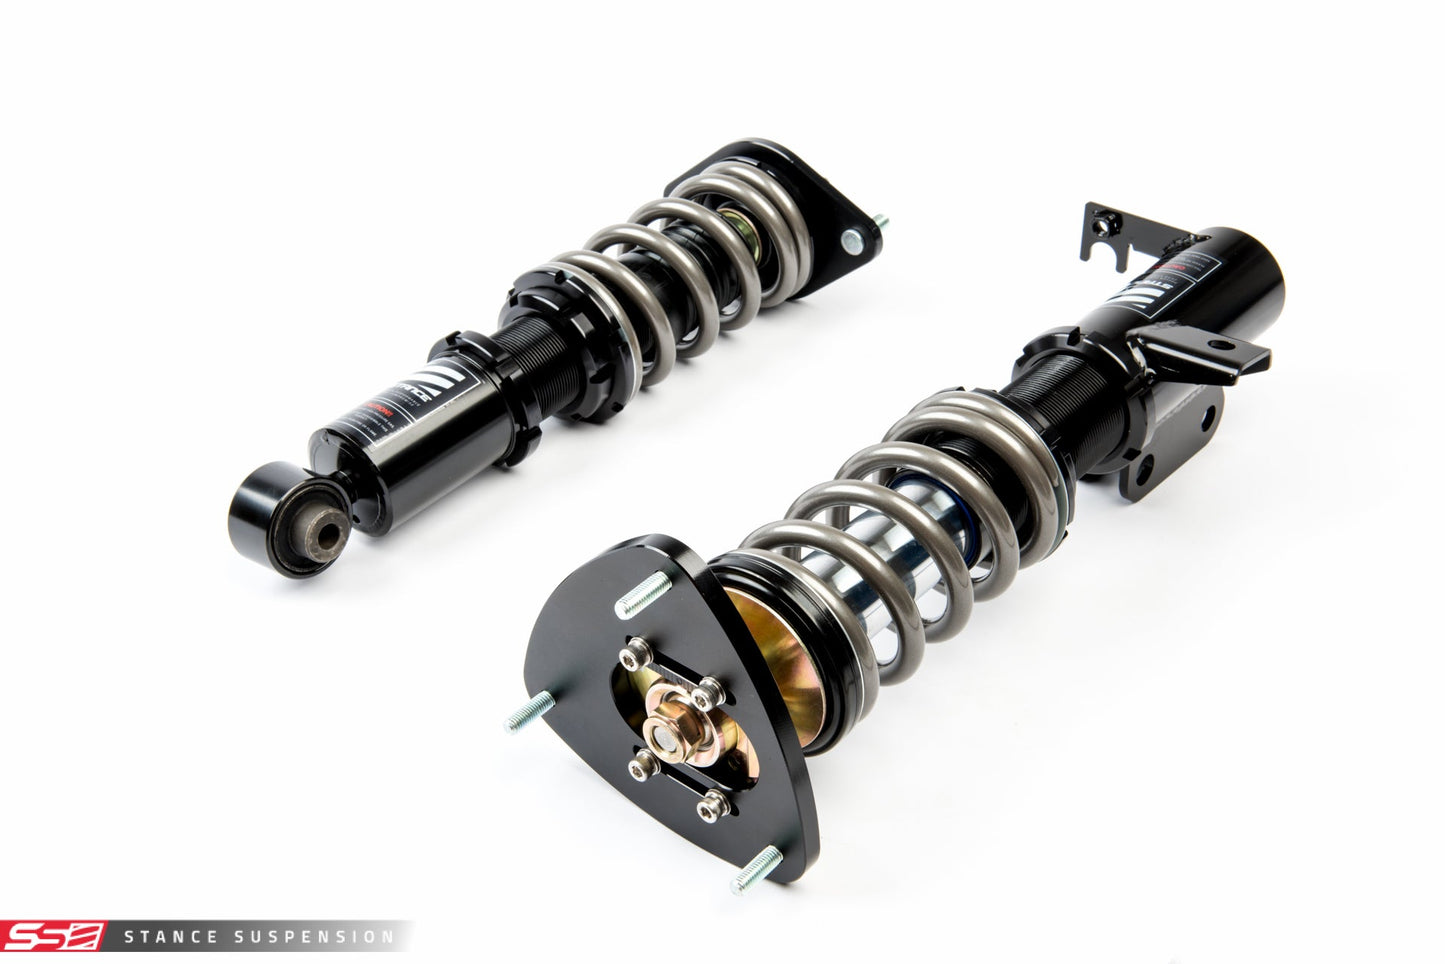 Stance Suspension - XR1 Coilovers for 13+ Scion FR-S / Subaru BRZ / Toyota GT86 ZN6 (ST-ZN6-XR1)